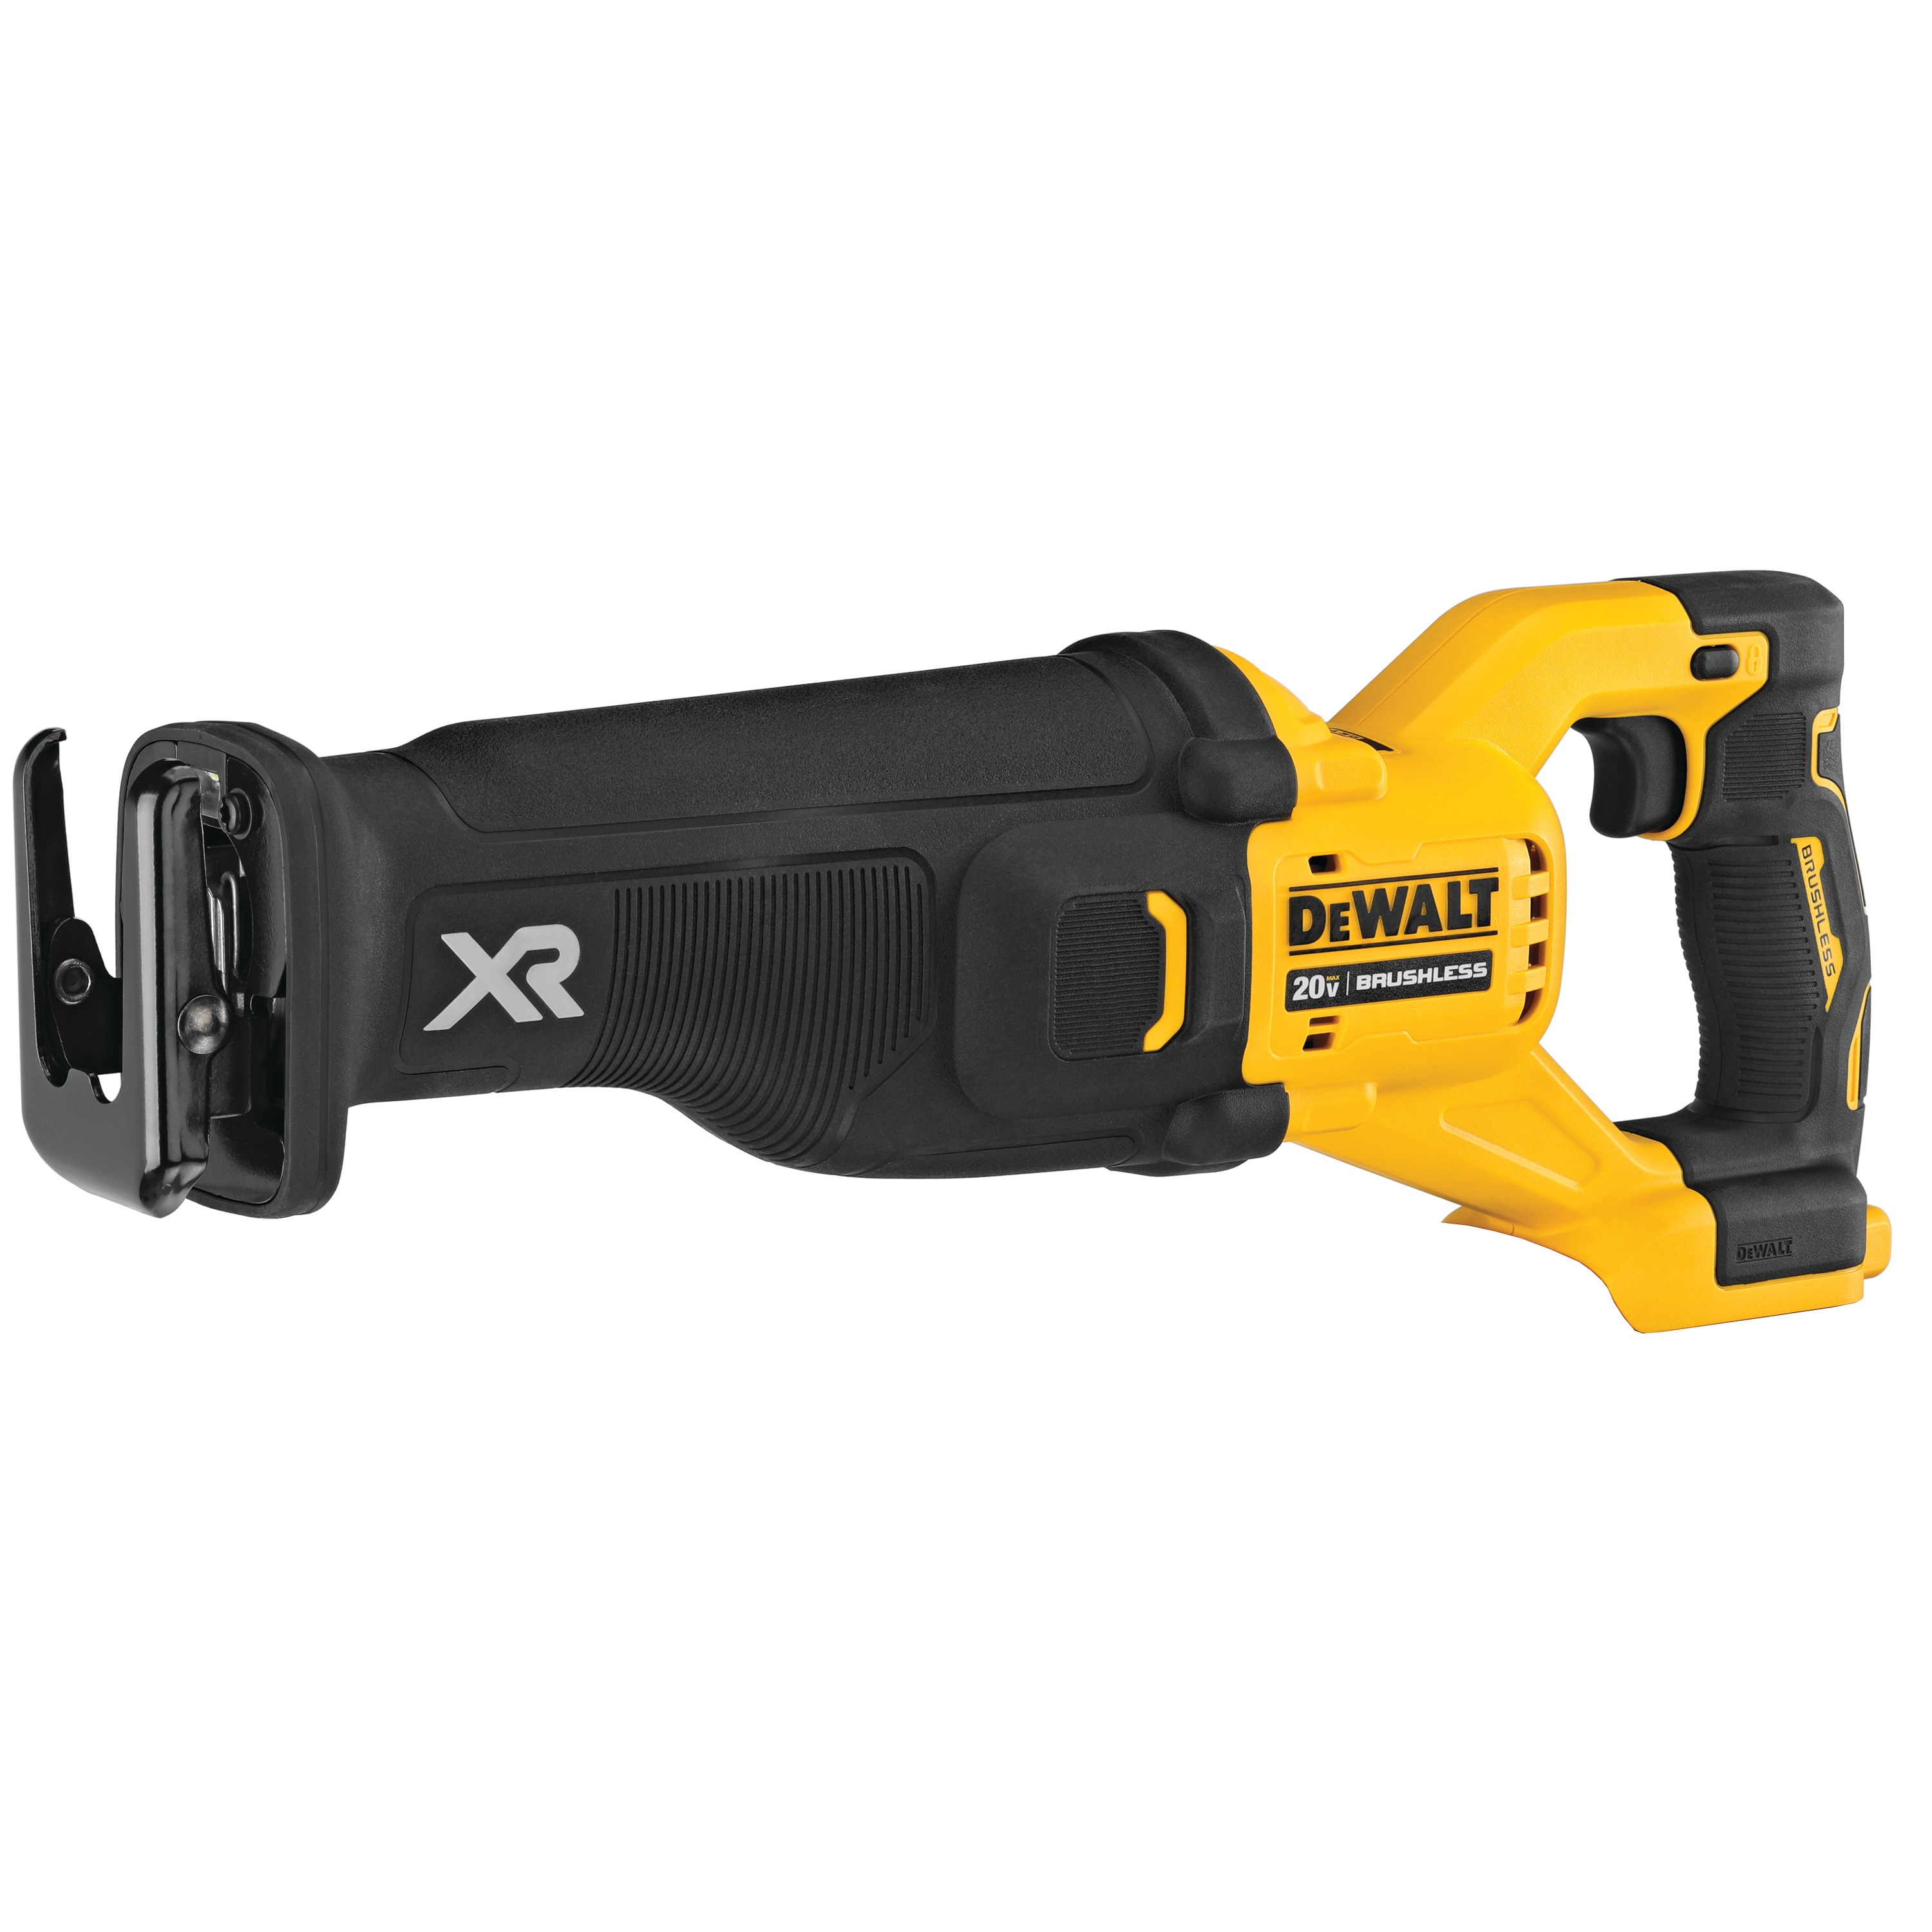 DEWALT - 20V MAX XR Brushless Cordless Reciprocating Saw with POWER DETECT Tool Technology Kit - DCS368B